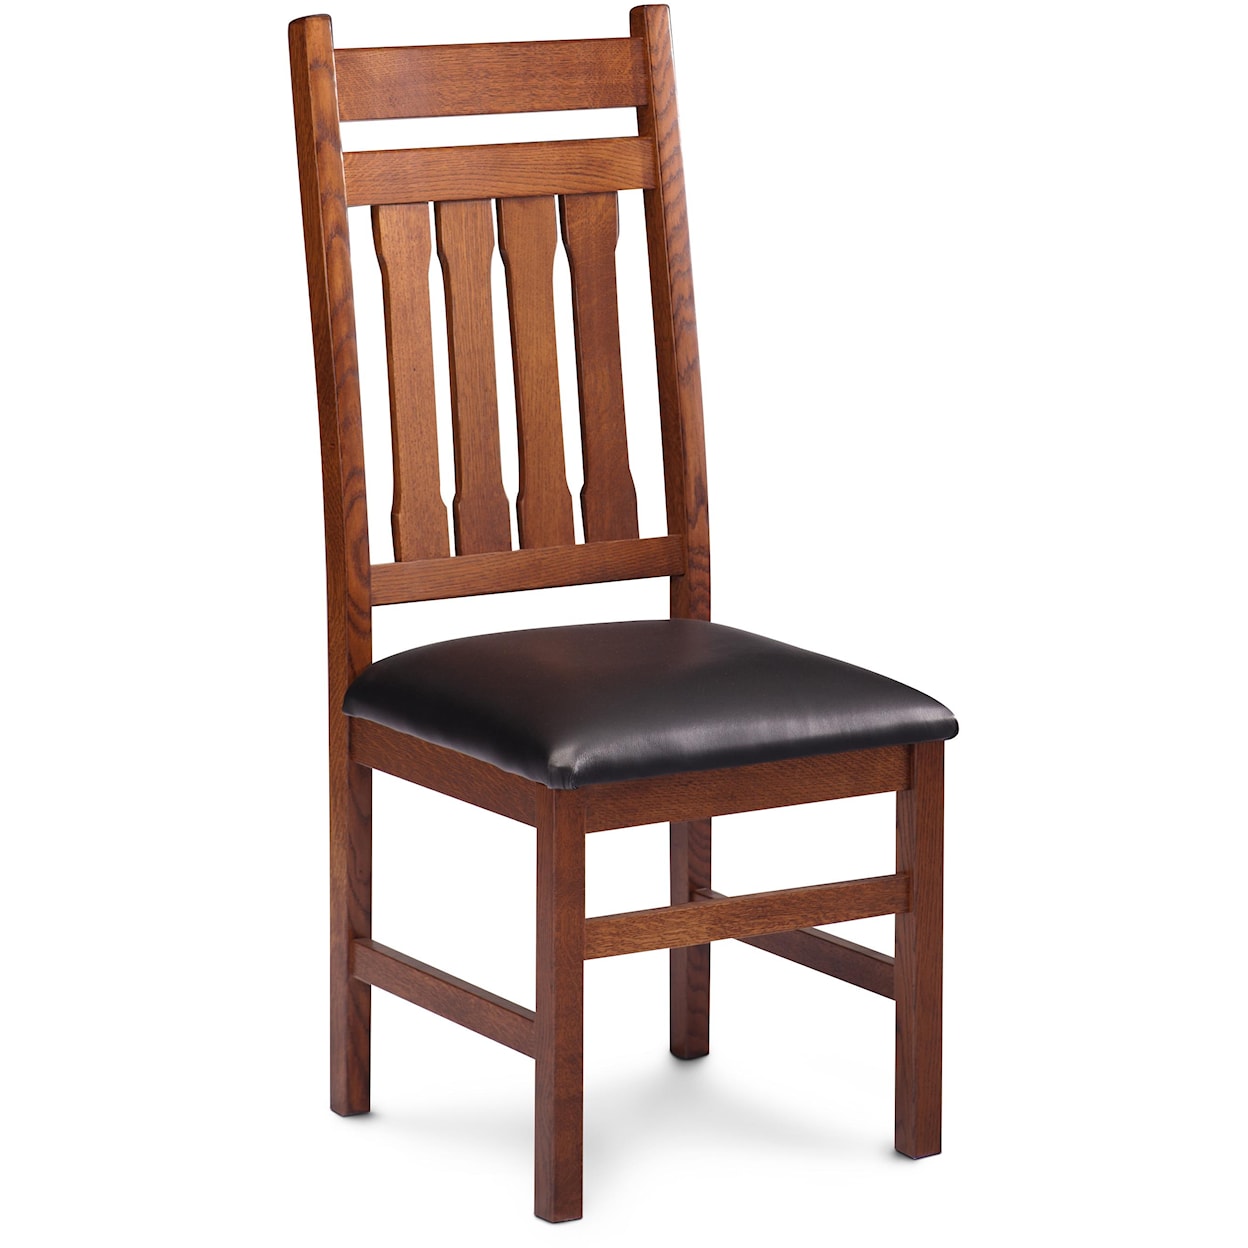 Simply Amish MaRyan Franklin Side Chair